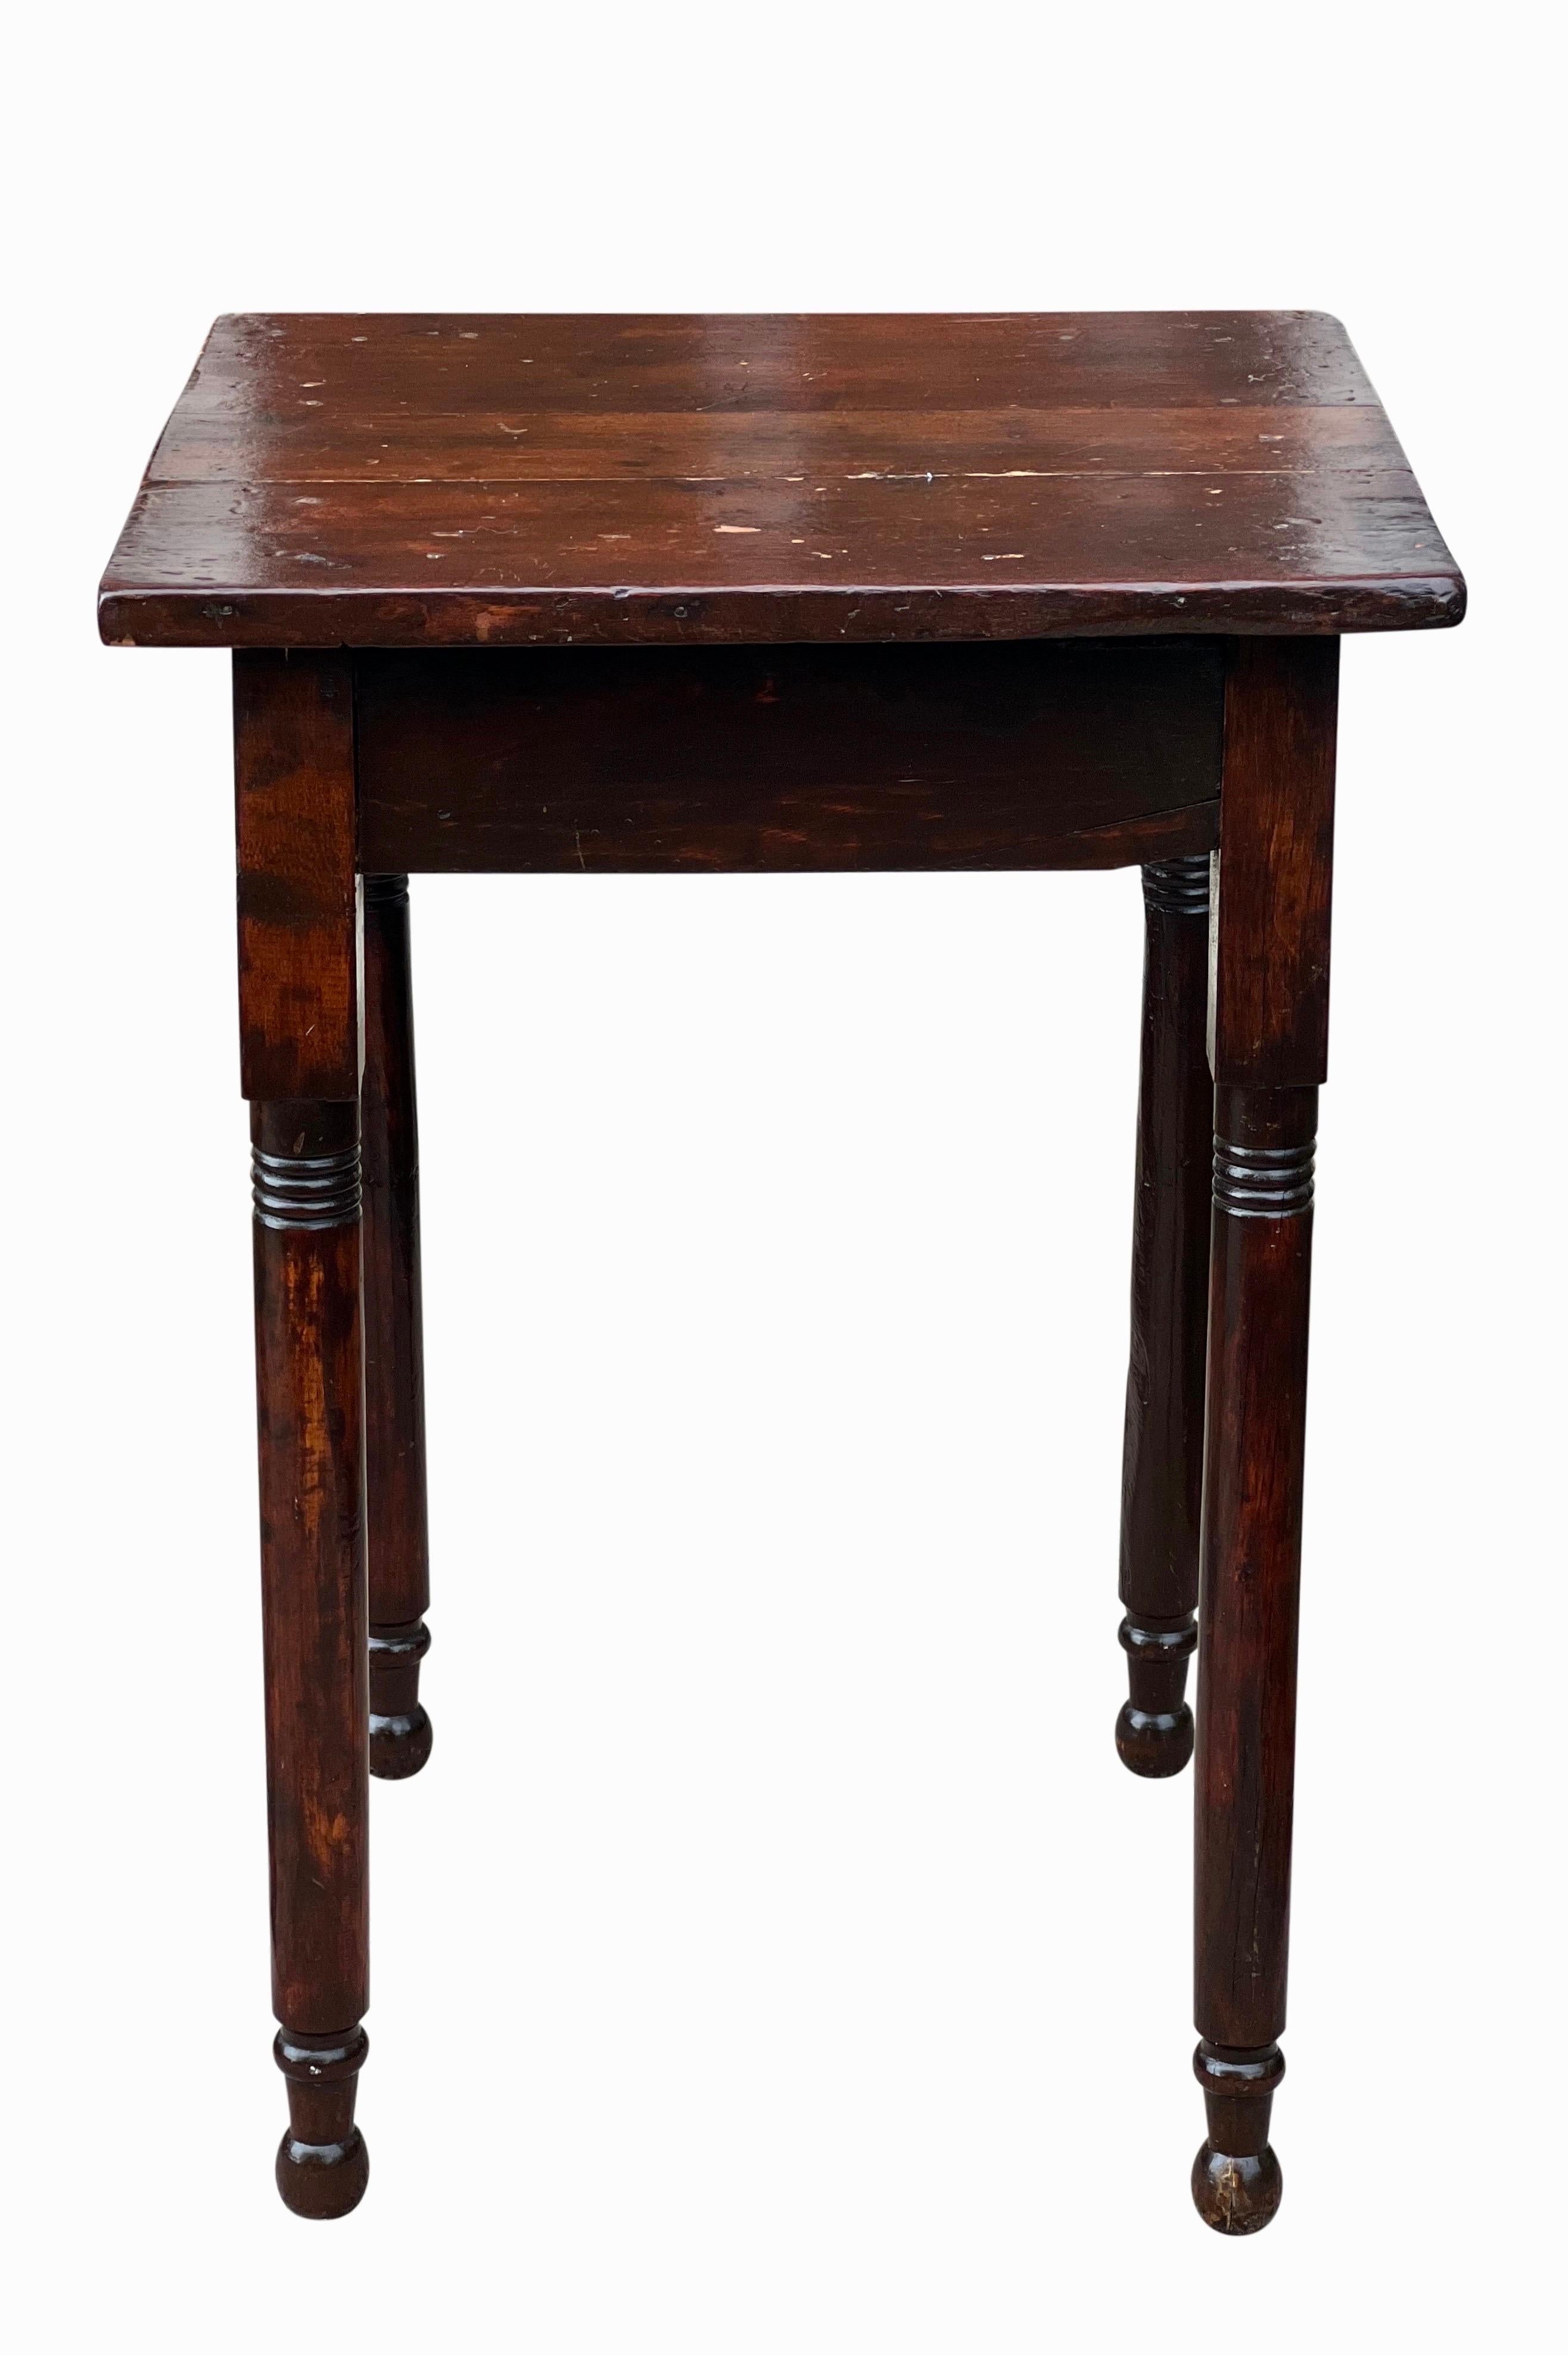 Antique mahogany small work table, side table or plant stand, circa 1860's.

Charming table with great patina and lots of rustic character.  It has a simple design with understated details including turned legs and a plank top.  Well crafted and